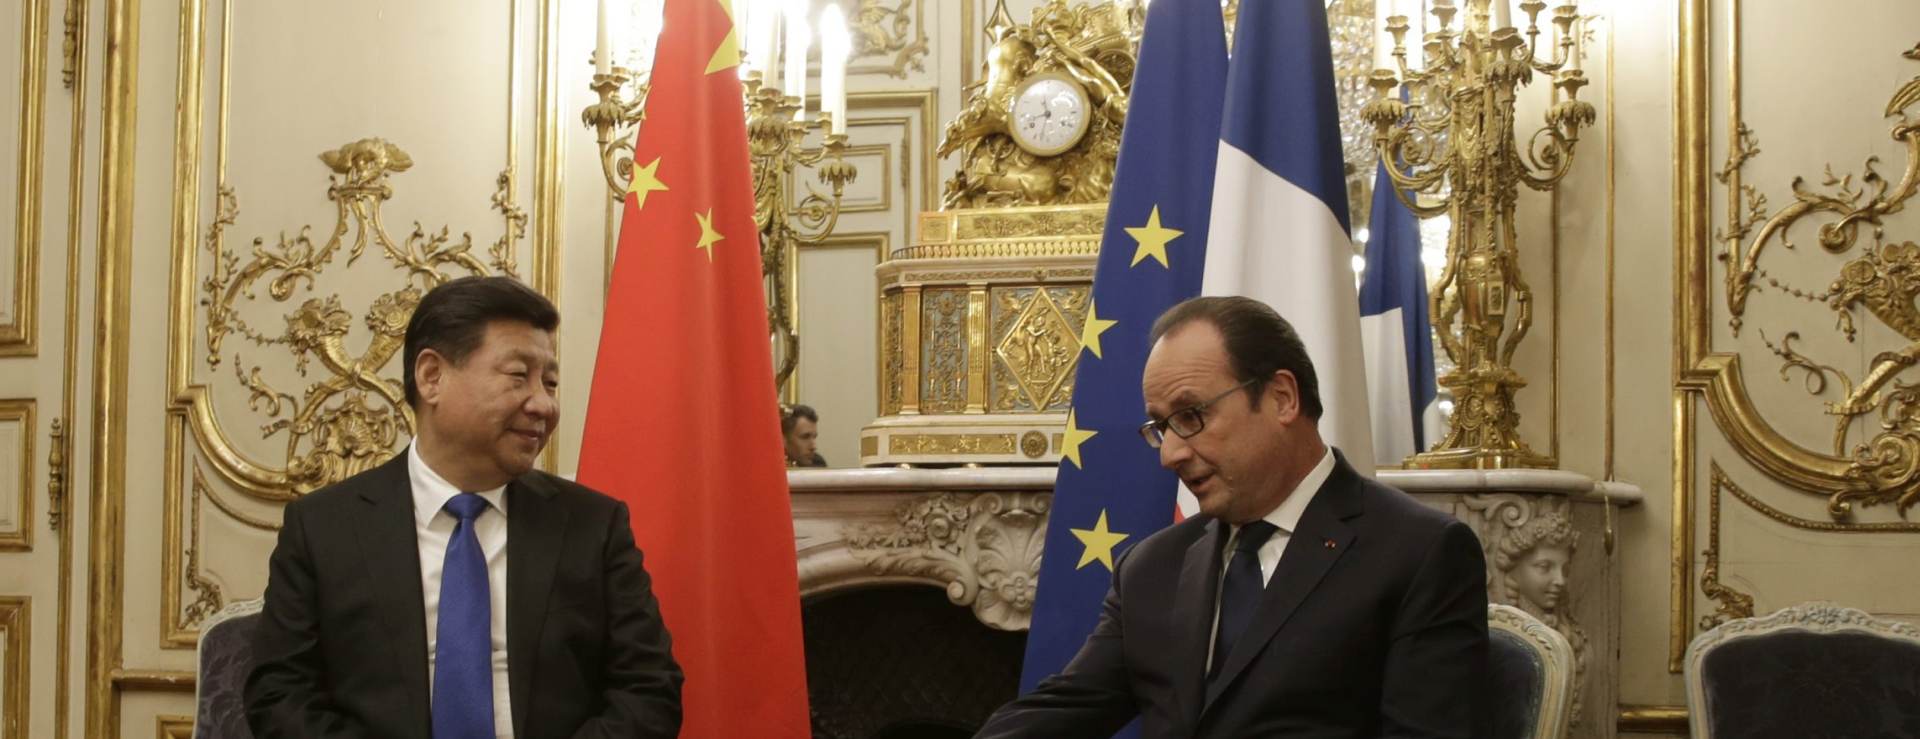 epa05048214 French President Francois Hollande (C-R) speaks with his Chinese counterpart Xi Jinping (C-L), as French Prime Minister Manuel Valls (R) looks on during a working dinner at Elysee Palace in Paris, France, 29 November 2015. World leaders are meeting in Paris from 30 November to 11 December for the The 21st Conference of the Parties (COP21).  EPA/PHILIPPE WOJAZER / POOL MAXPPP OUT